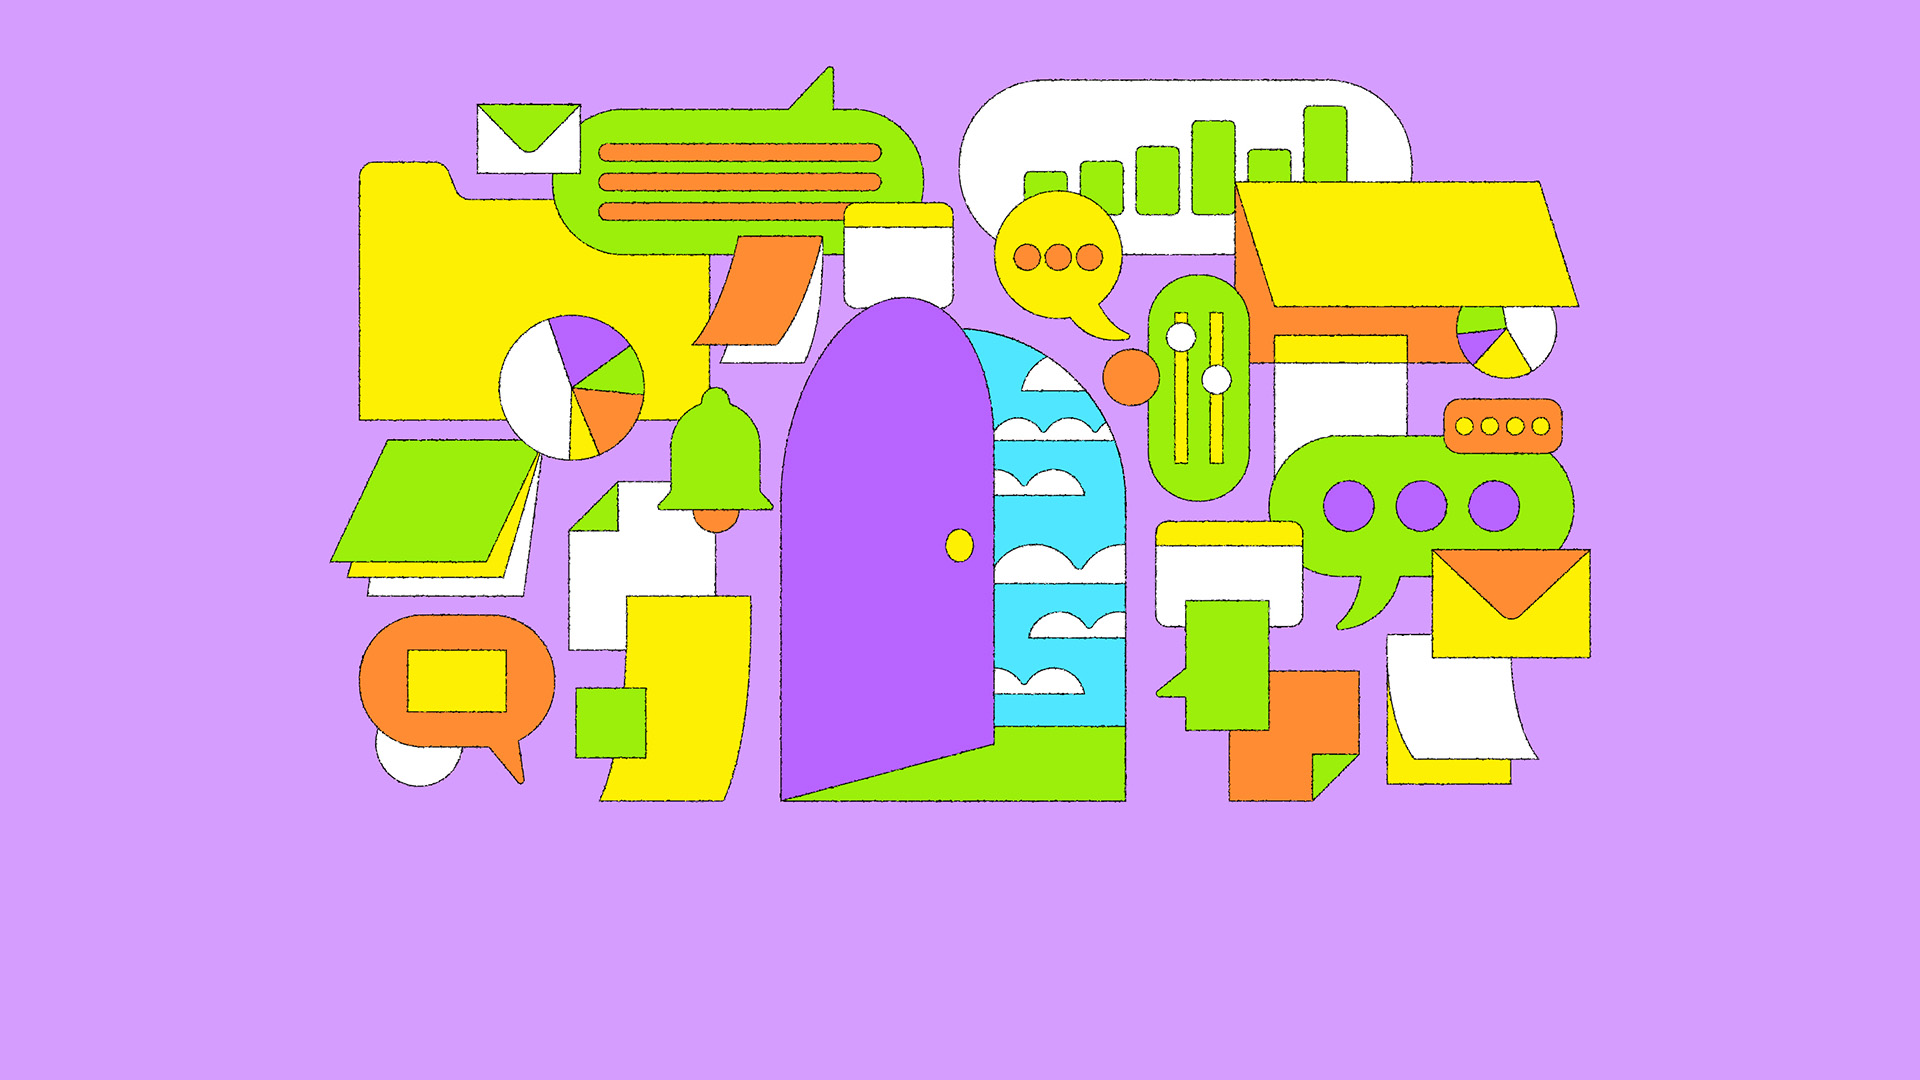 An illustration depicts a colorful montage of work-related icons, including chat windows, speech ballons, sticky notes, alarm bells, email messages, charts, and graphs. In the center is a doorway opening to show the outside world